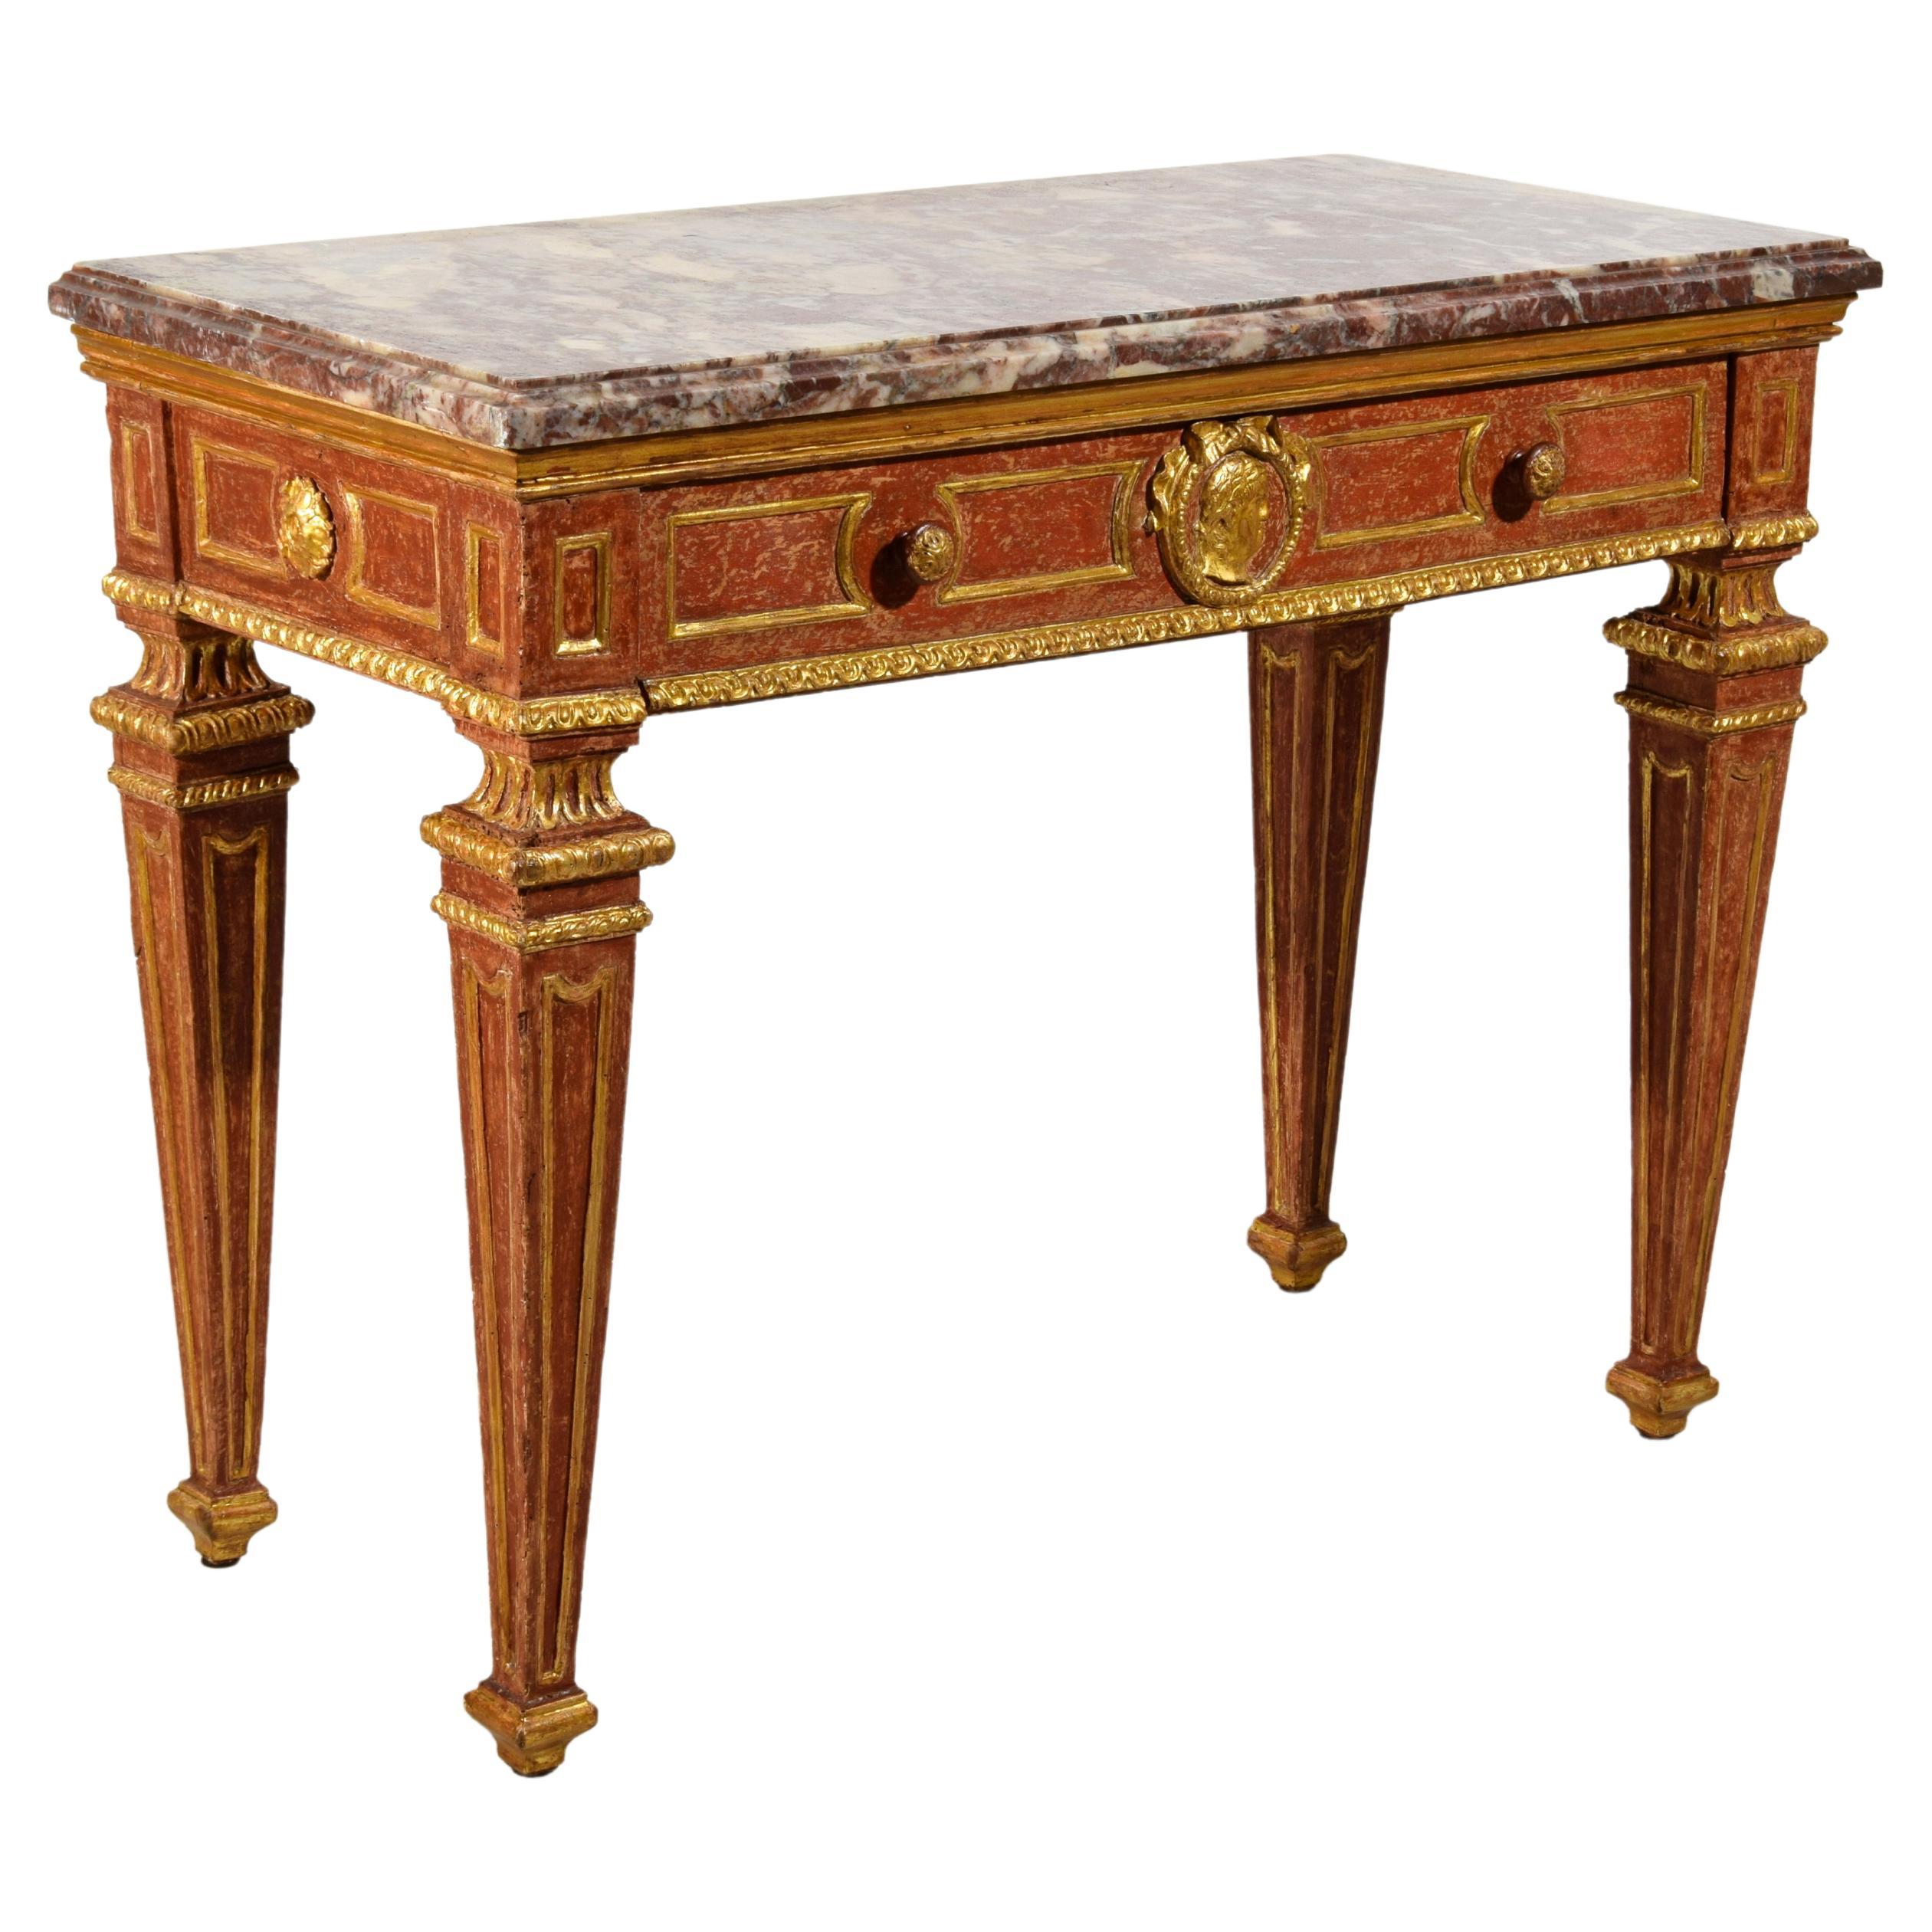 18th Century, Italian Neoclassical Gilded and Red Lacquered Wood with Marble Top